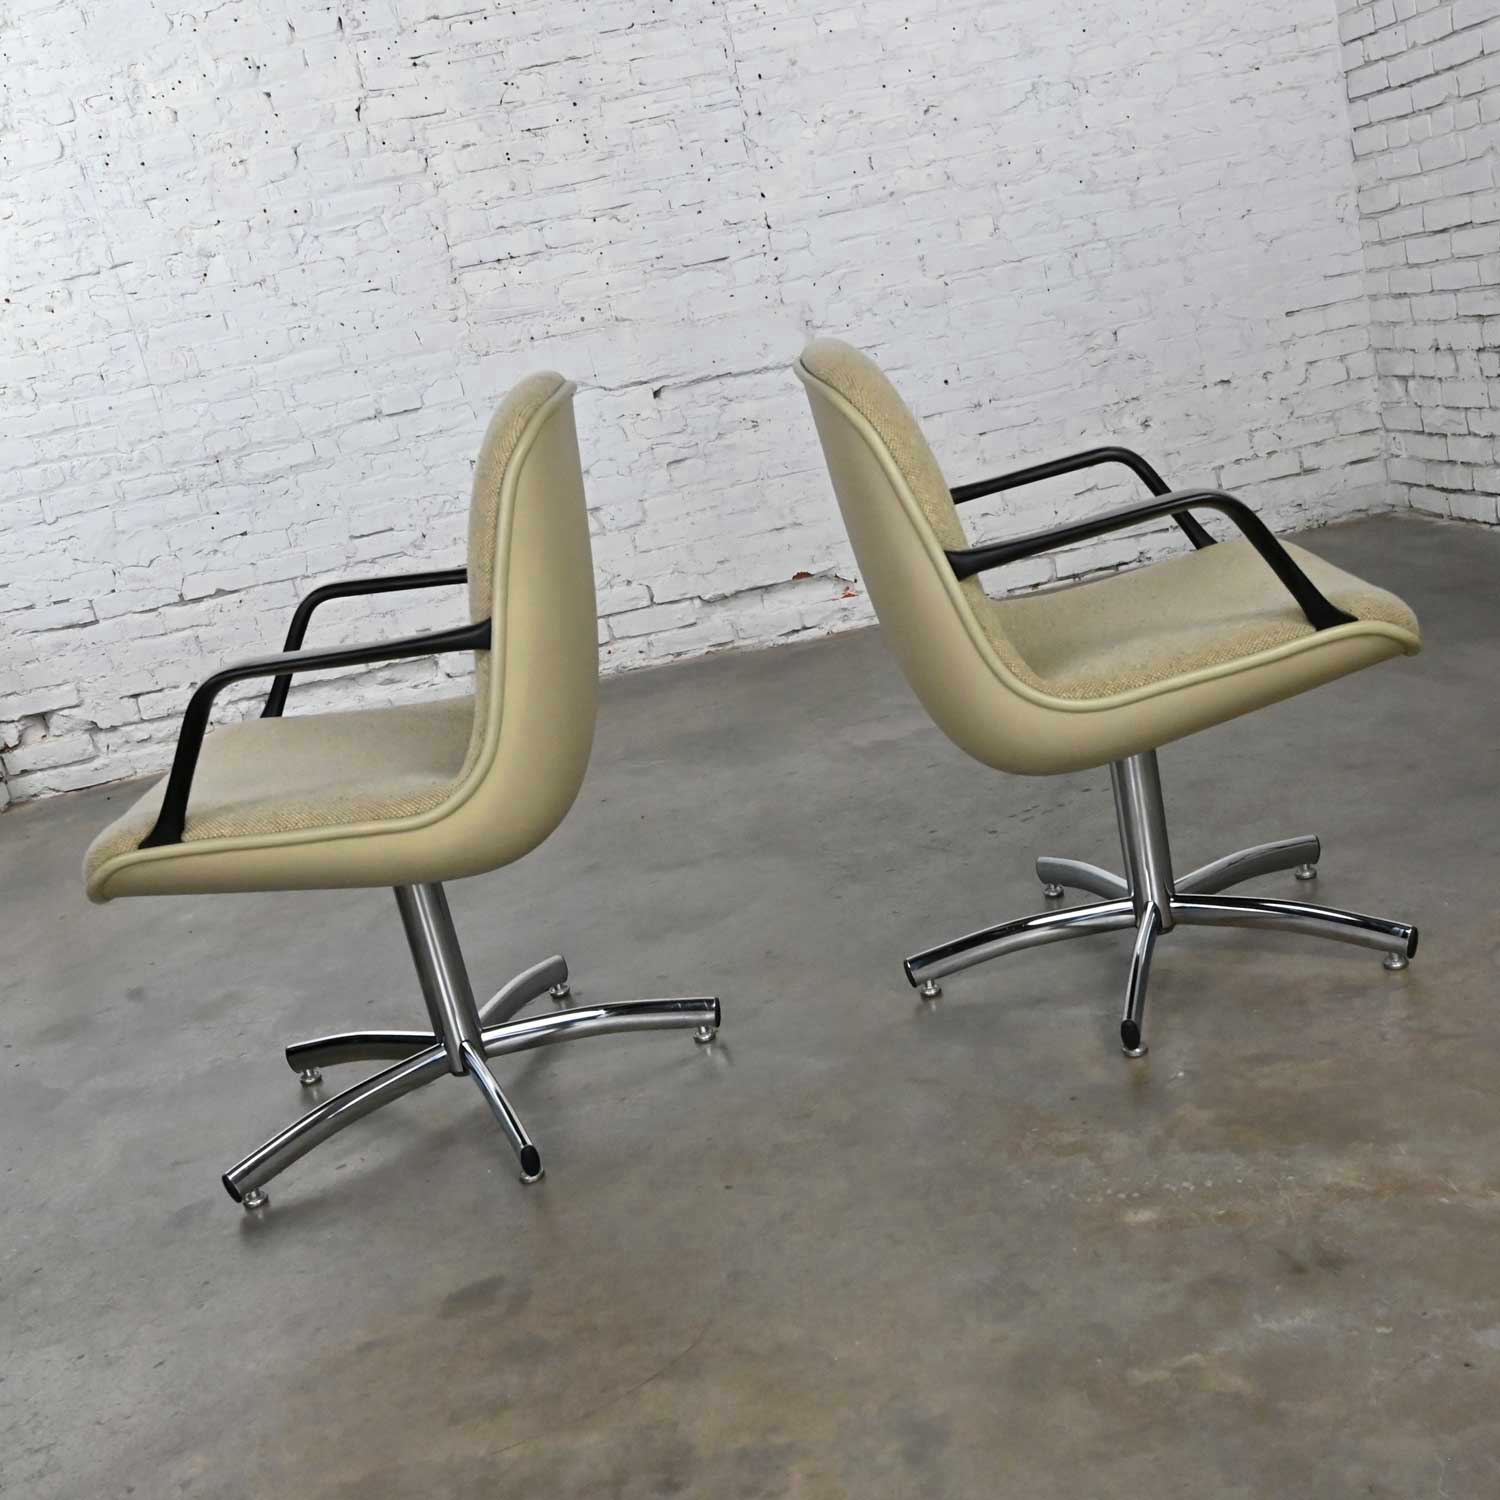 Modern Steelcase Model 451 5 Prong Chrome Base Oatmeal Fabric Office Chairs Style Charles Pollock a Pair